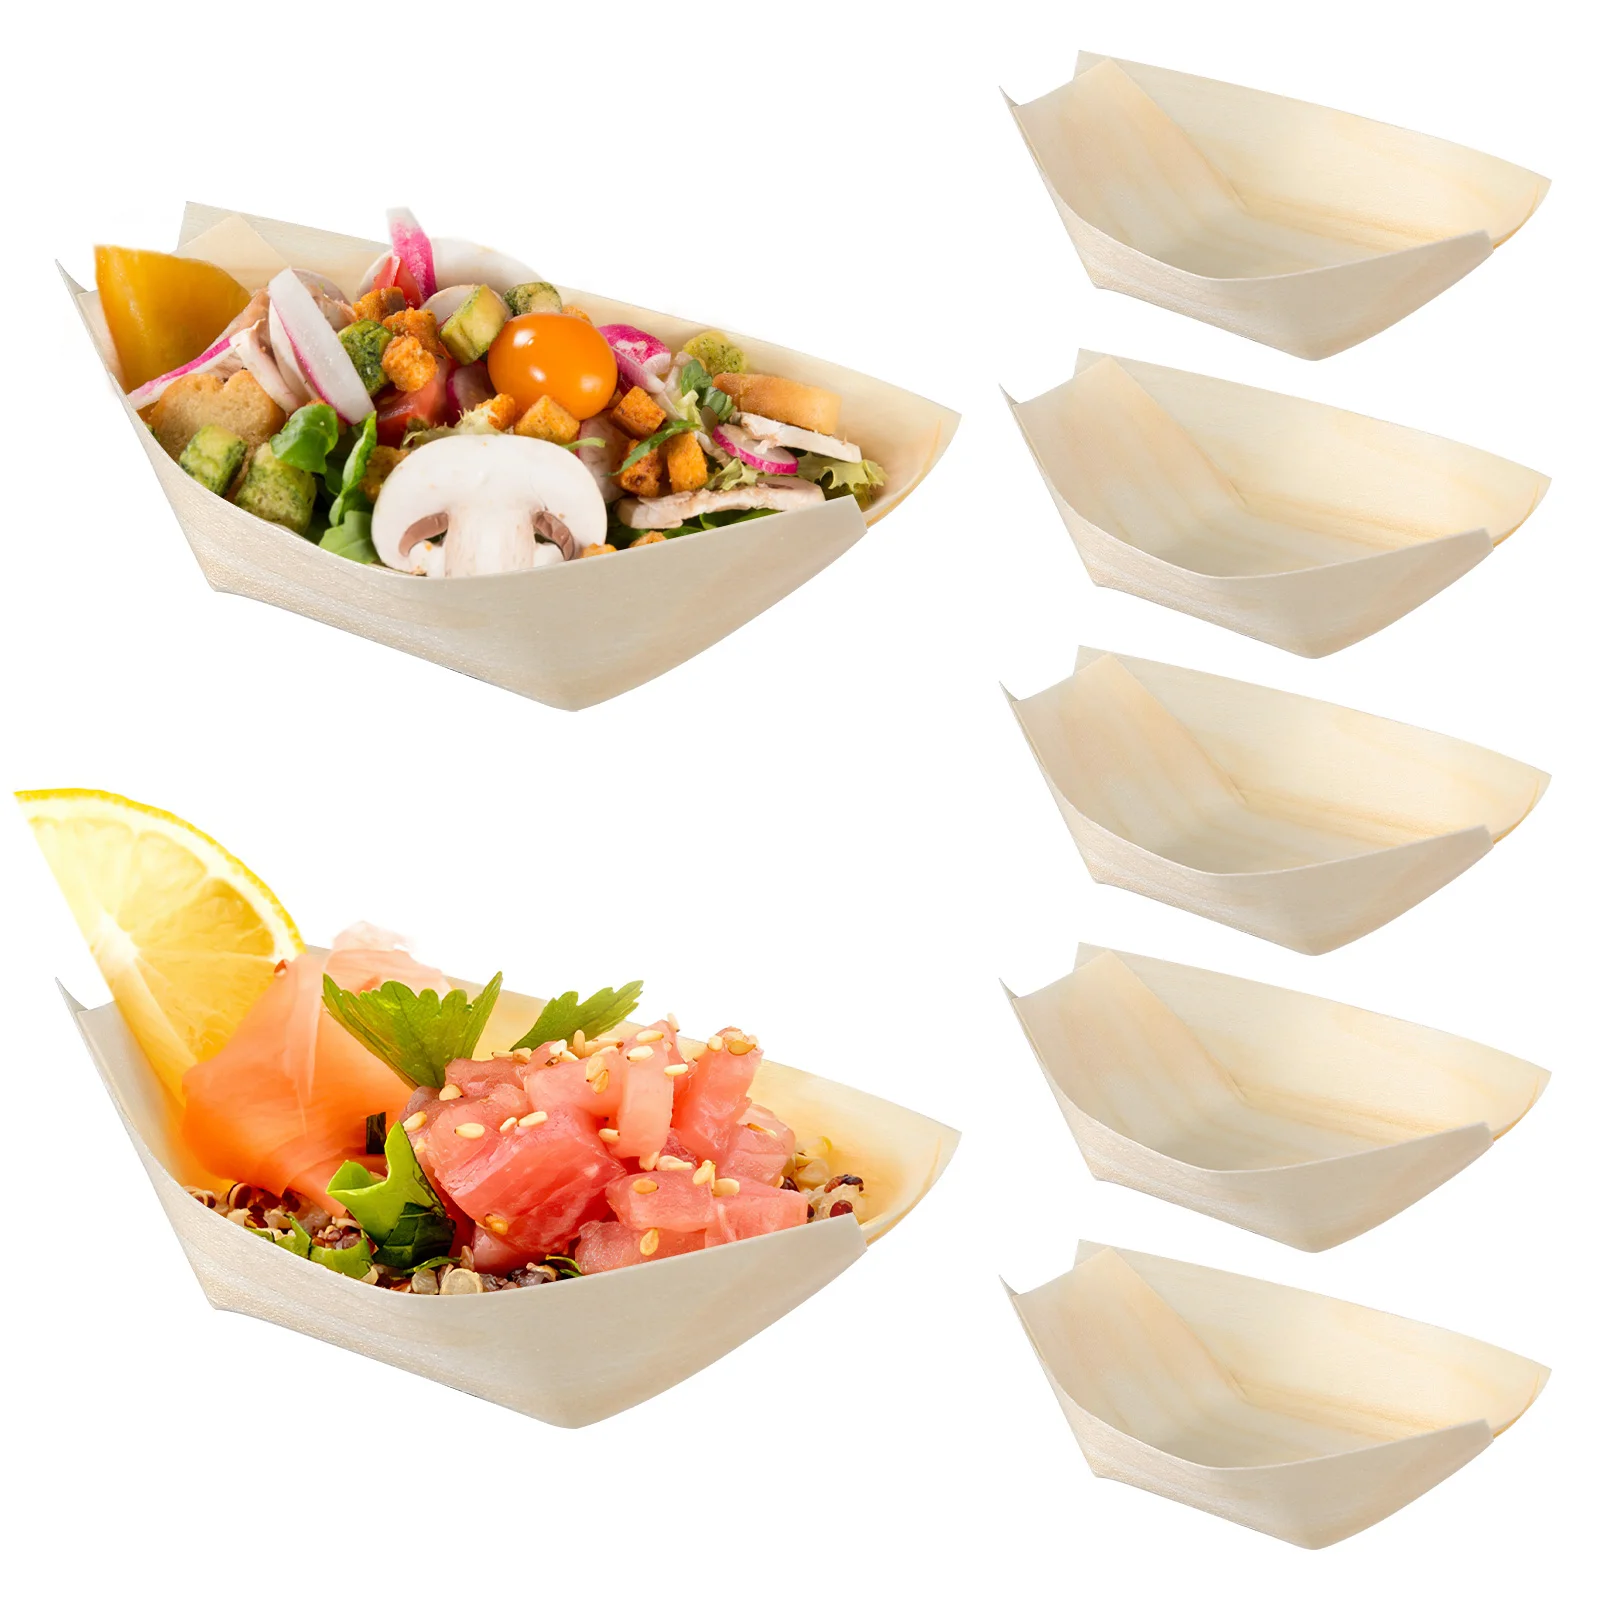 

Food Serving Sushi Boat Boats Tray Wood Wooden Plate Papertraysappetizer Bowls Party Bowldessert Dishes Containerrestaurantware